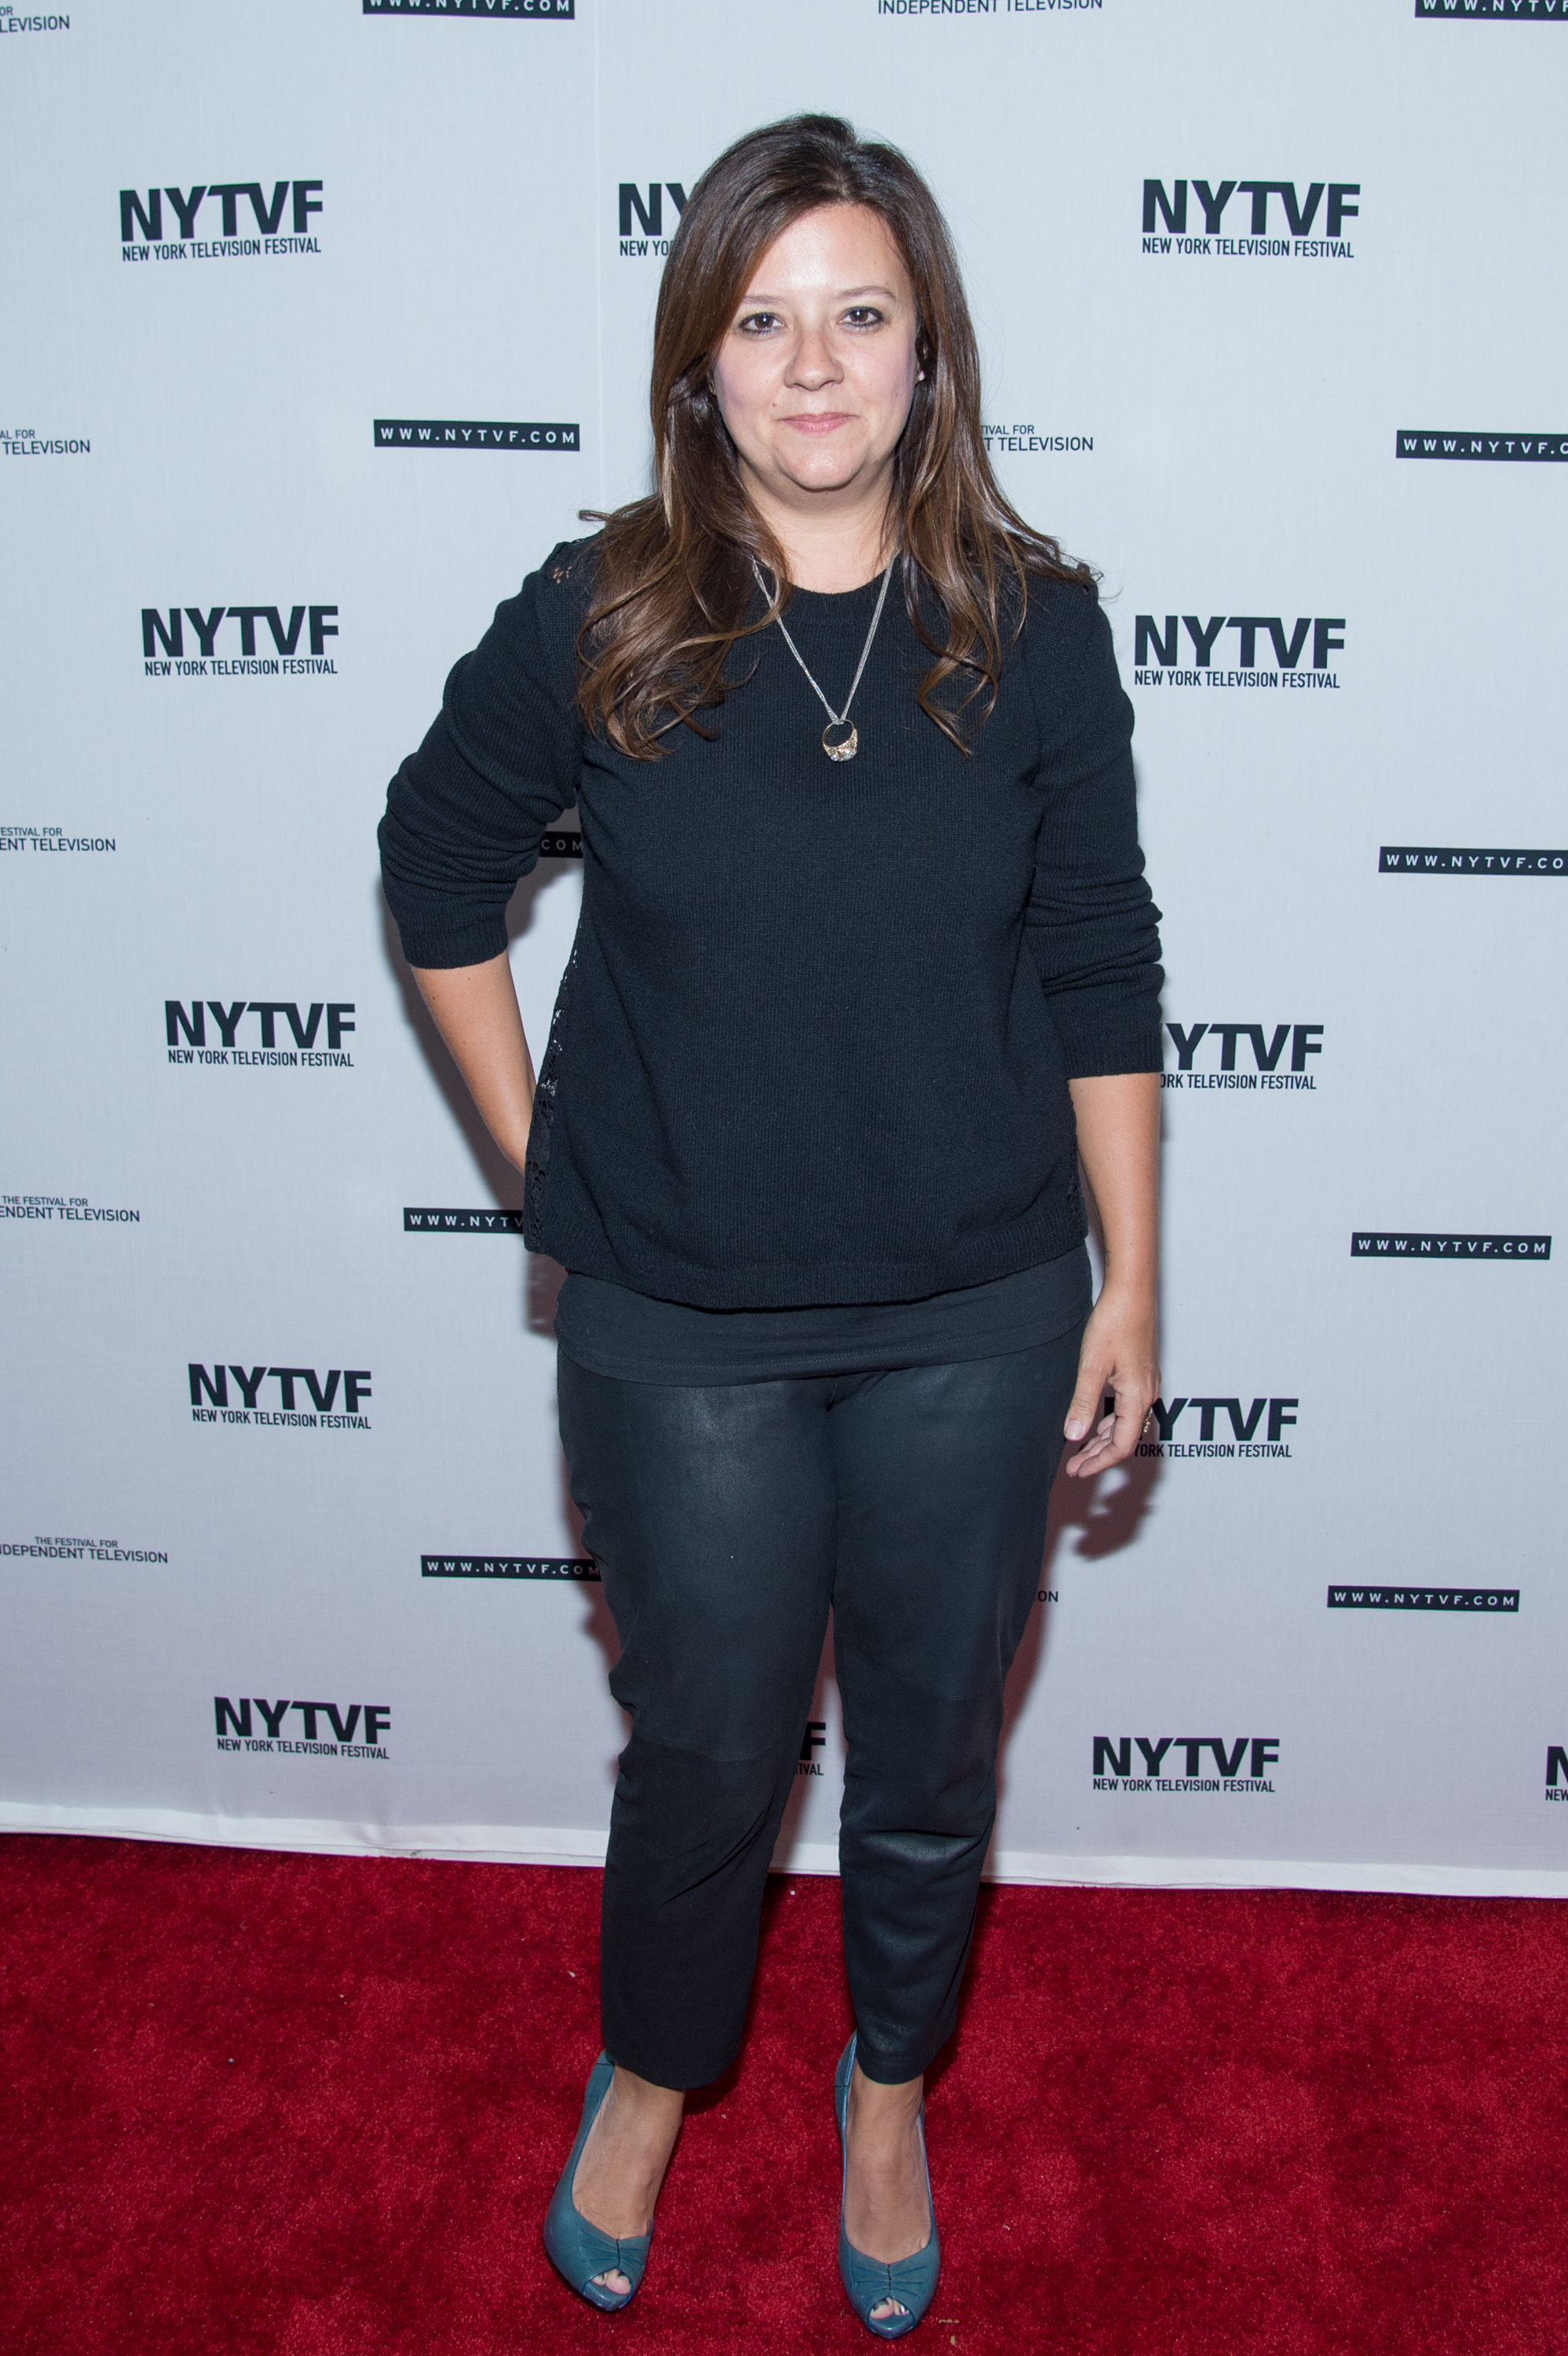 Producer Stephanie Laing  on Oct. 23, 2014 in New York City. (Mark Sagliocco—Getty Images)